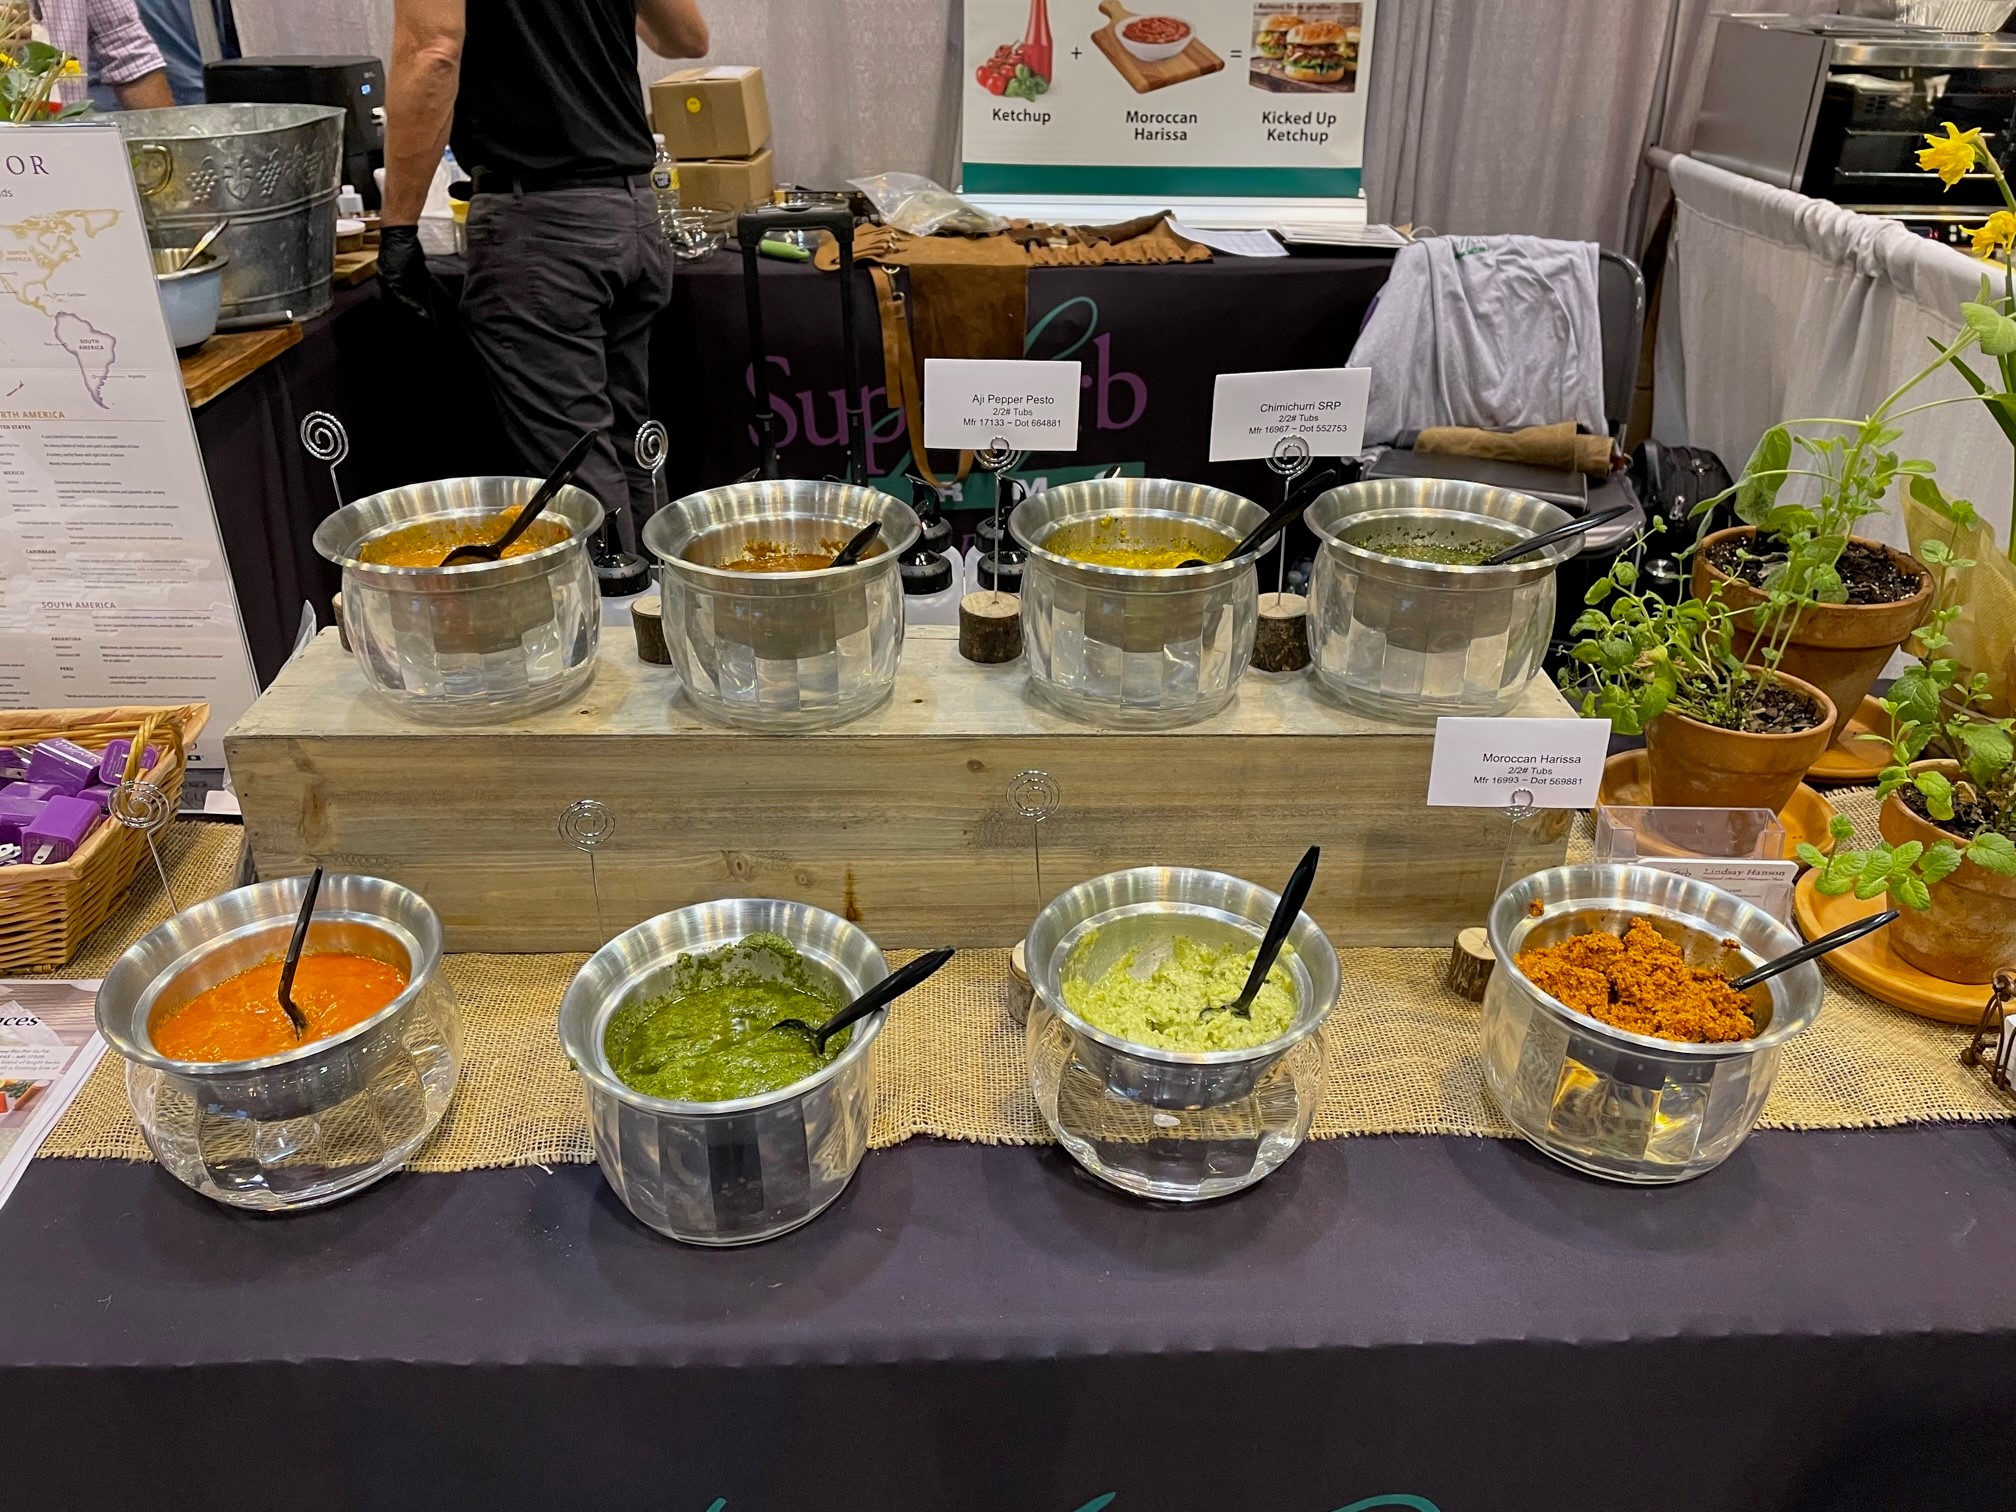 Dot Foods Innovations Trade Show 2022 Highlights SupHerb Farms